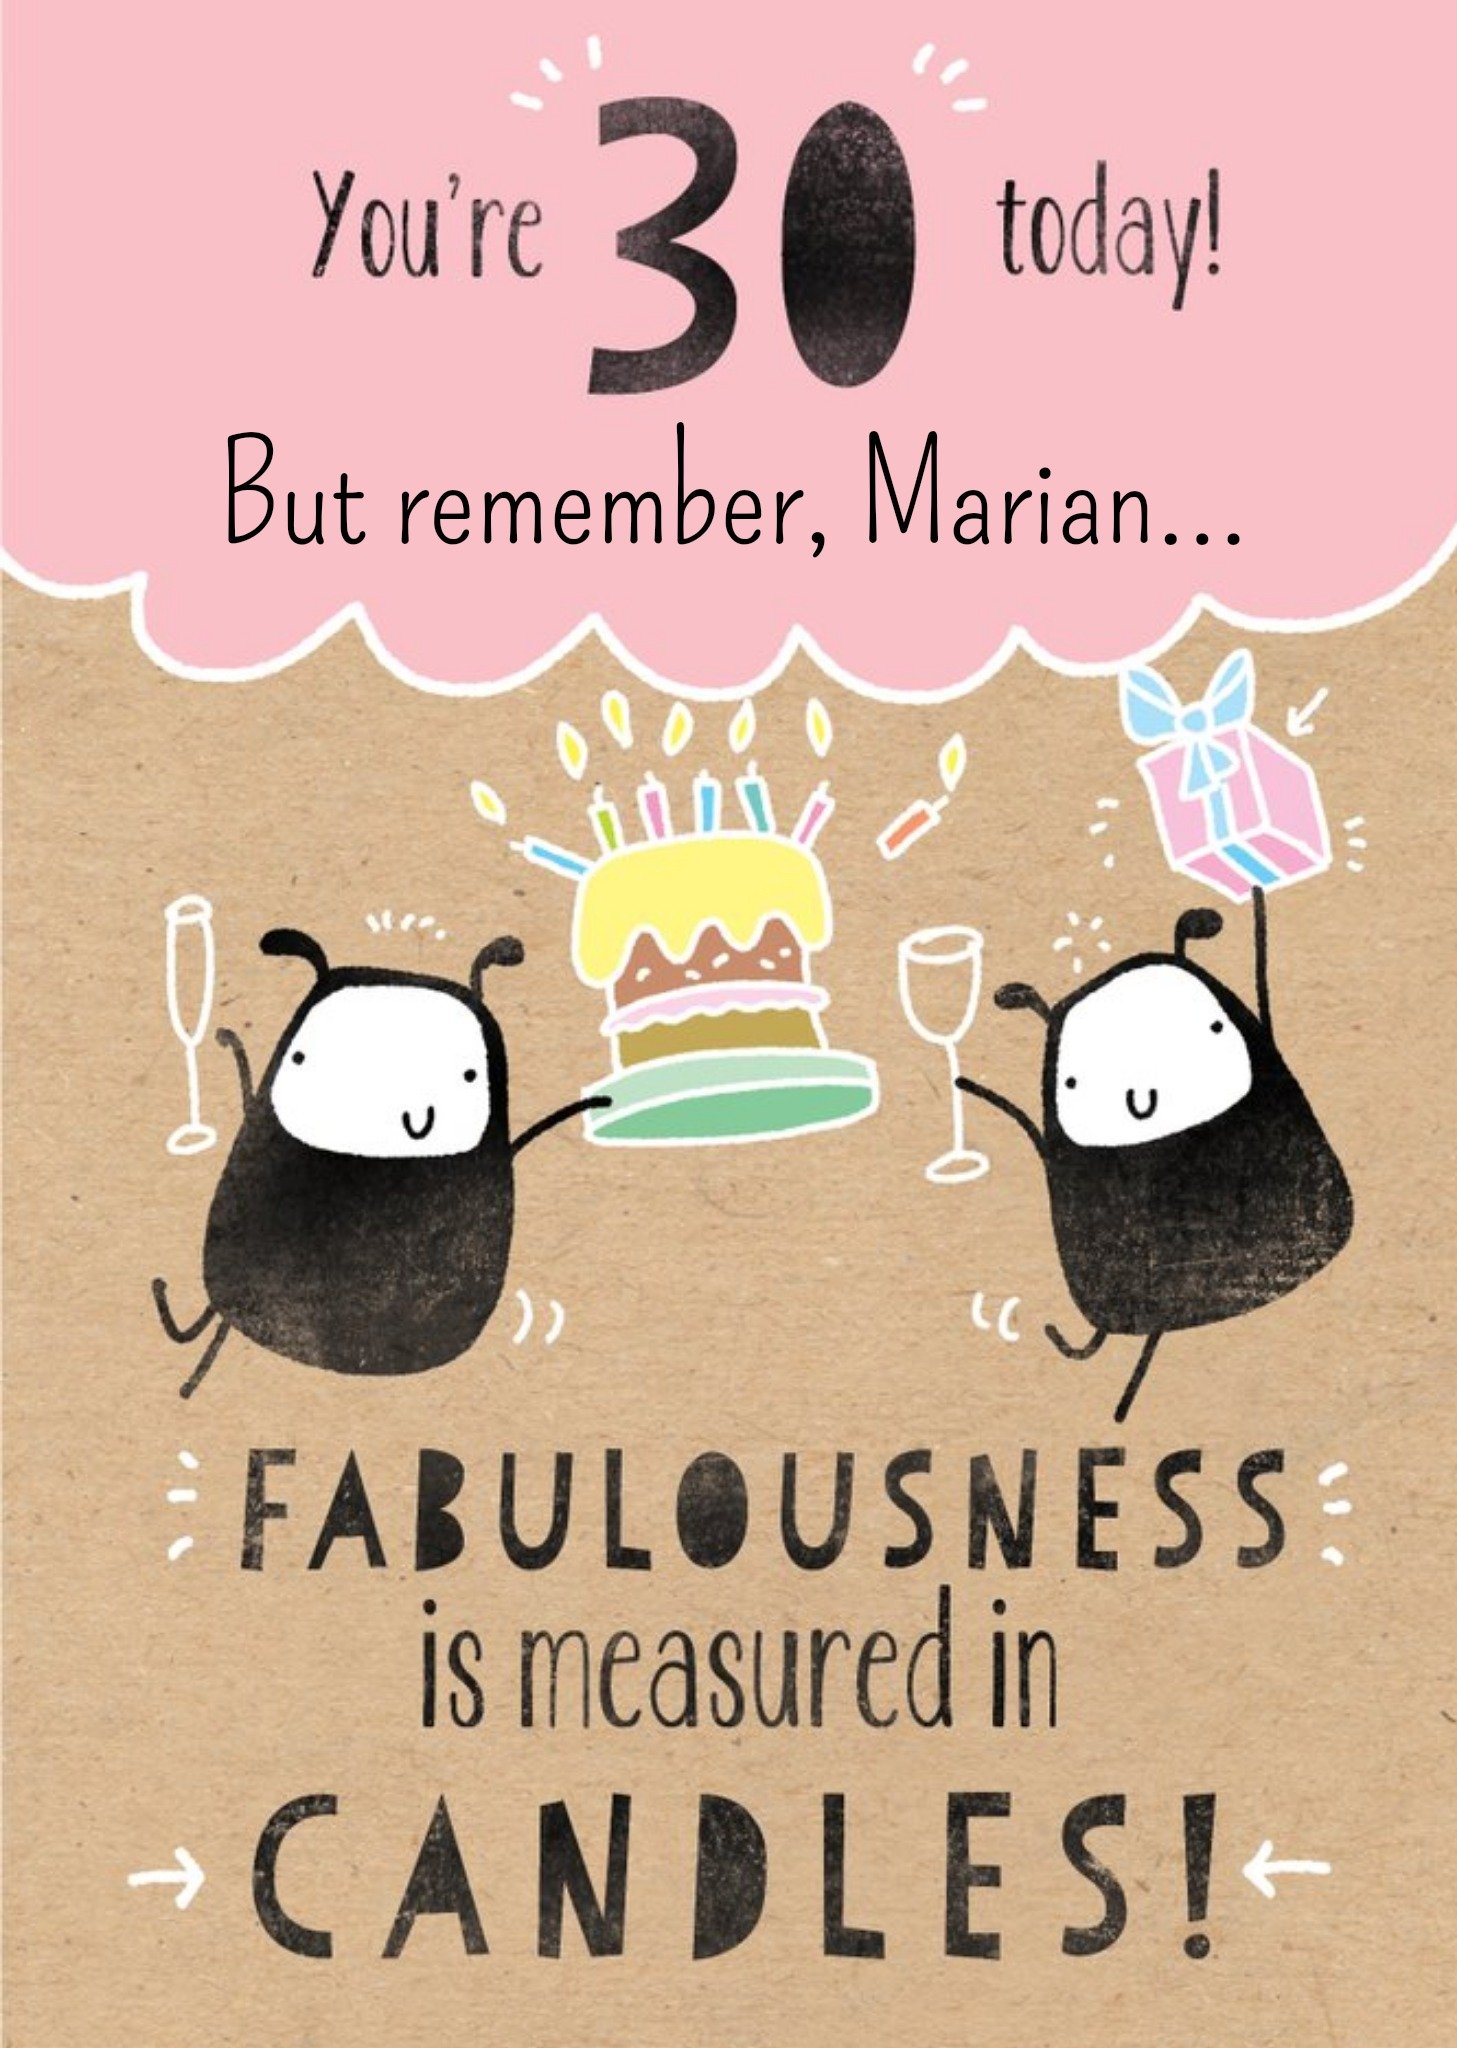 Other Deeply Sheeply 30th Birthday Card Ecard